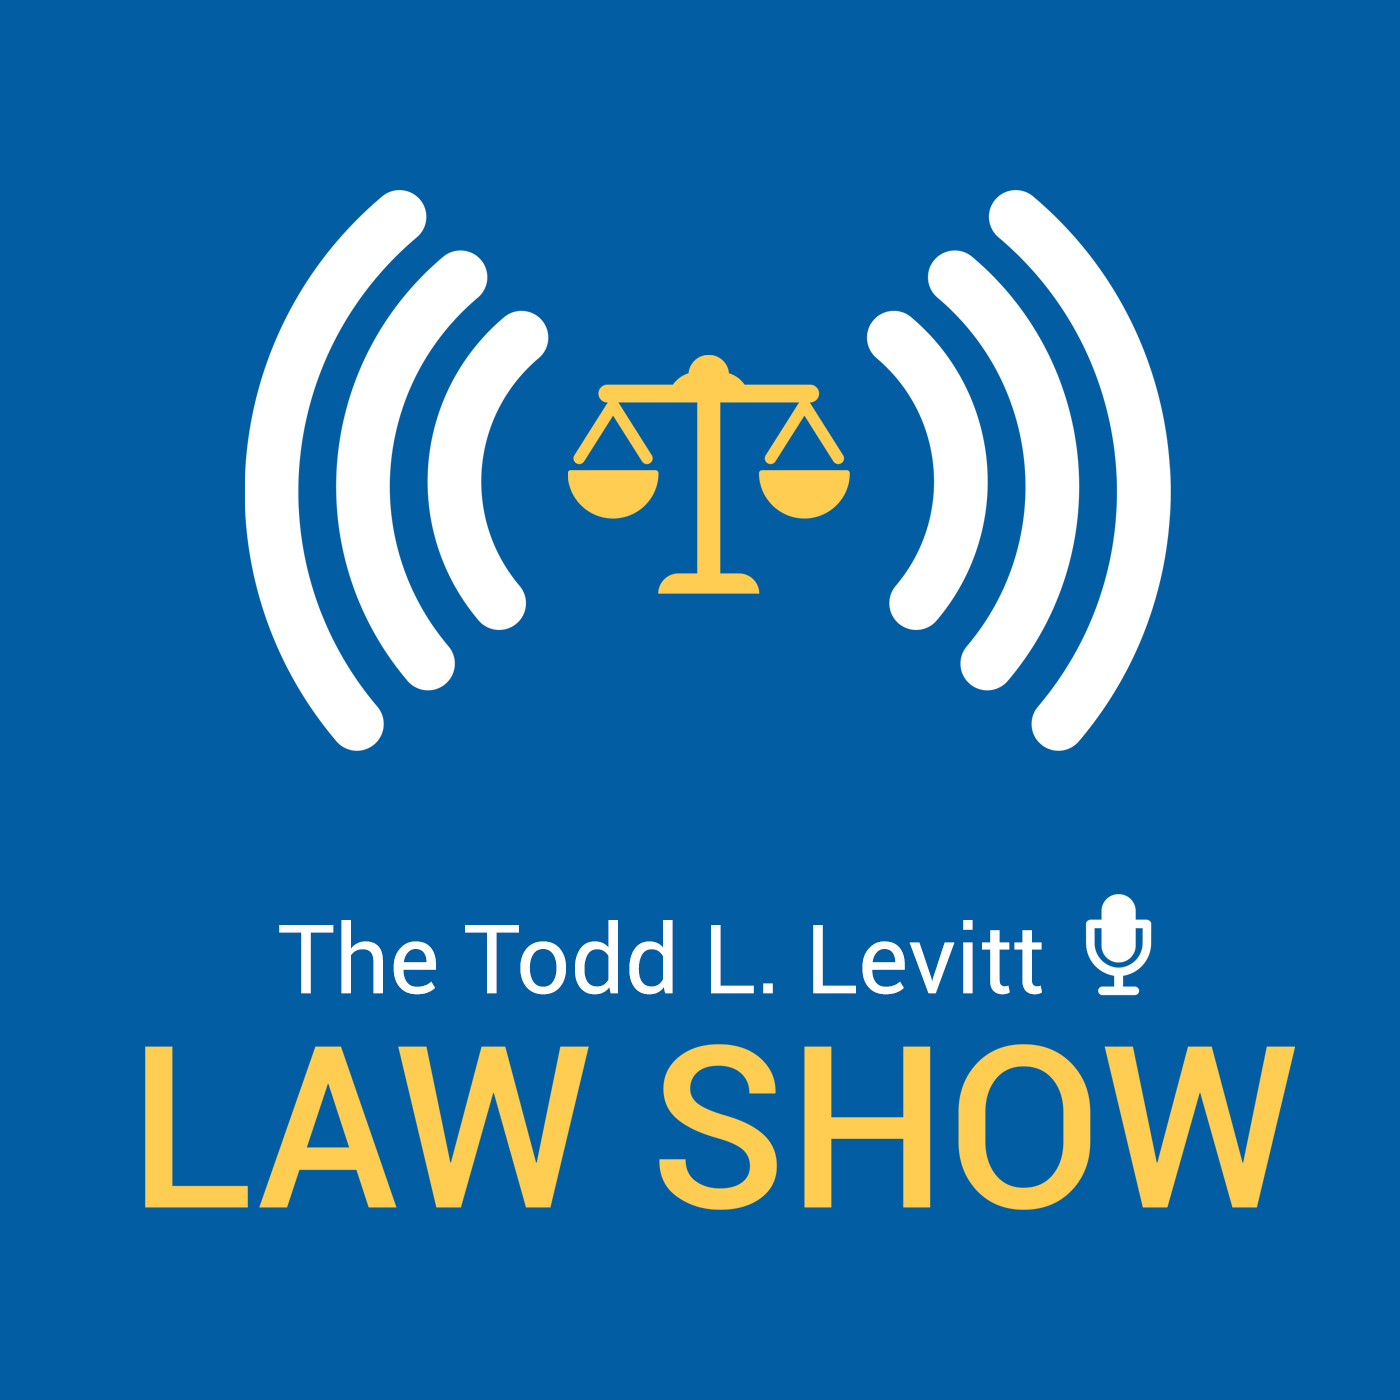 Matthew R. Abel, Attorney at Law, Cannabis Counsel, Executive Director, Michigan Chapter, the National Organization for the Reform of Marijuana Laws (NORML) GREAT SHOW!!